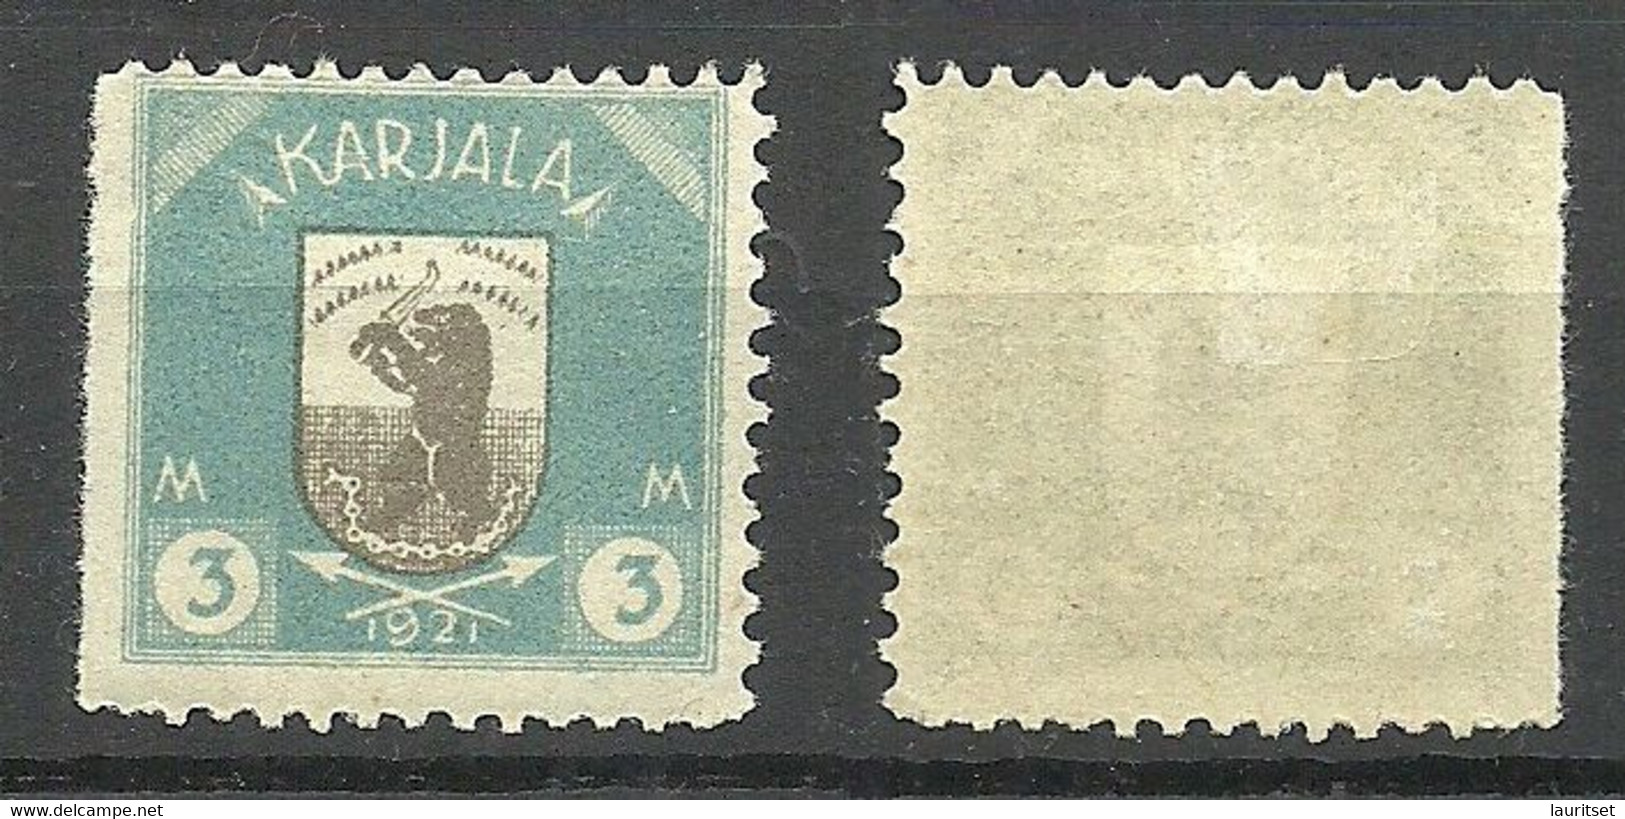 KARELIA Karelien FINLAND FINNLAND 1922 Michel 10 * NB! Variety Aart Left Side Seems To Be Imperforated! - Emissioni Locali